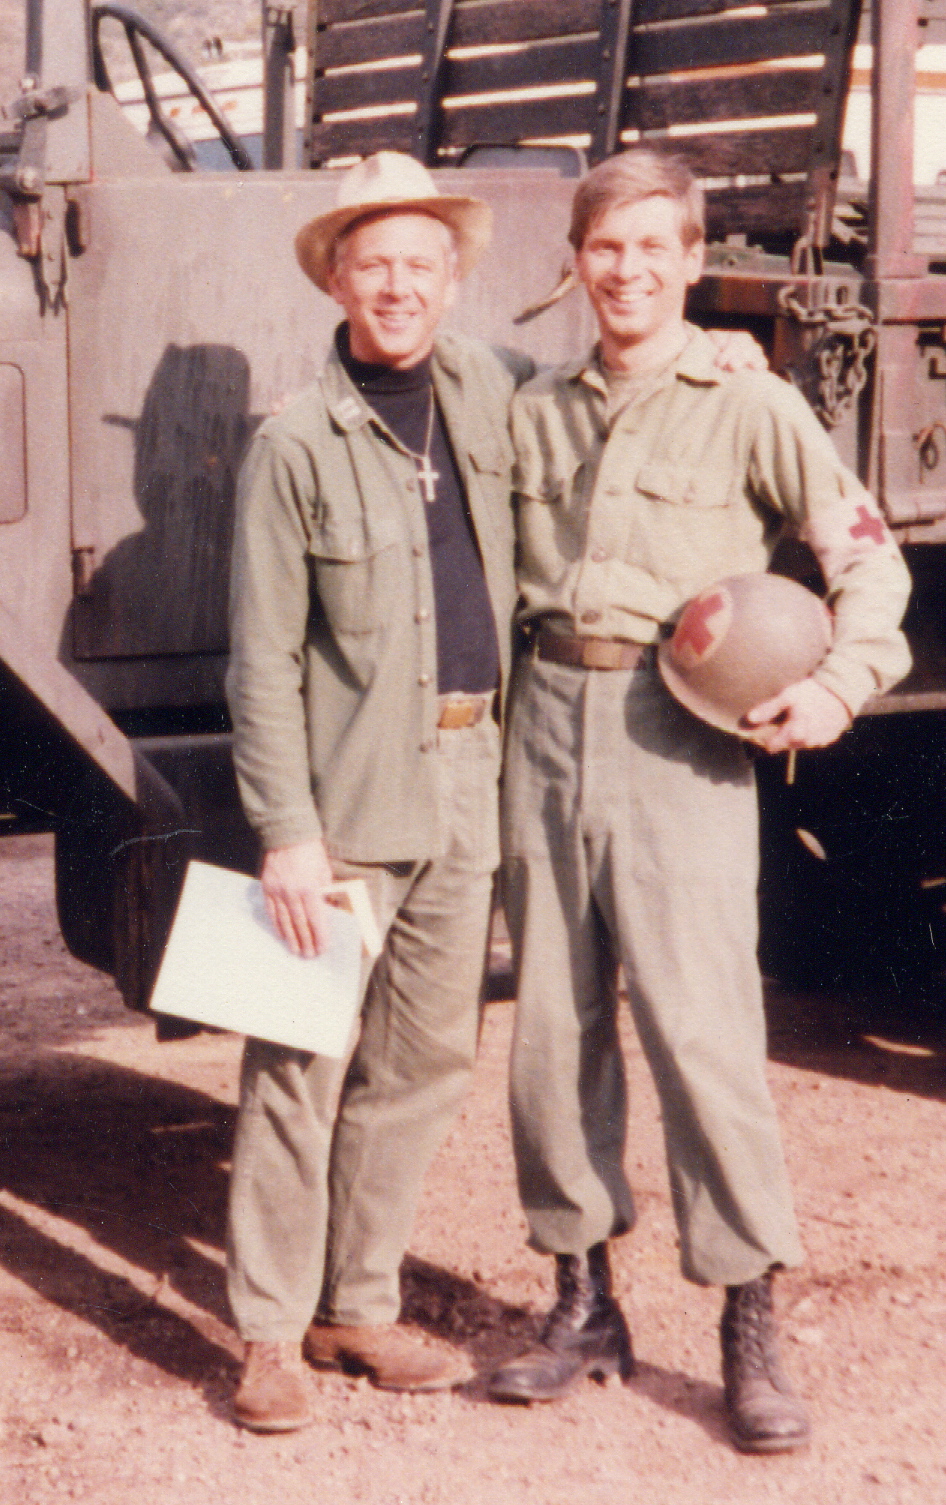 William Christopher and John Otrin on the set of MASH